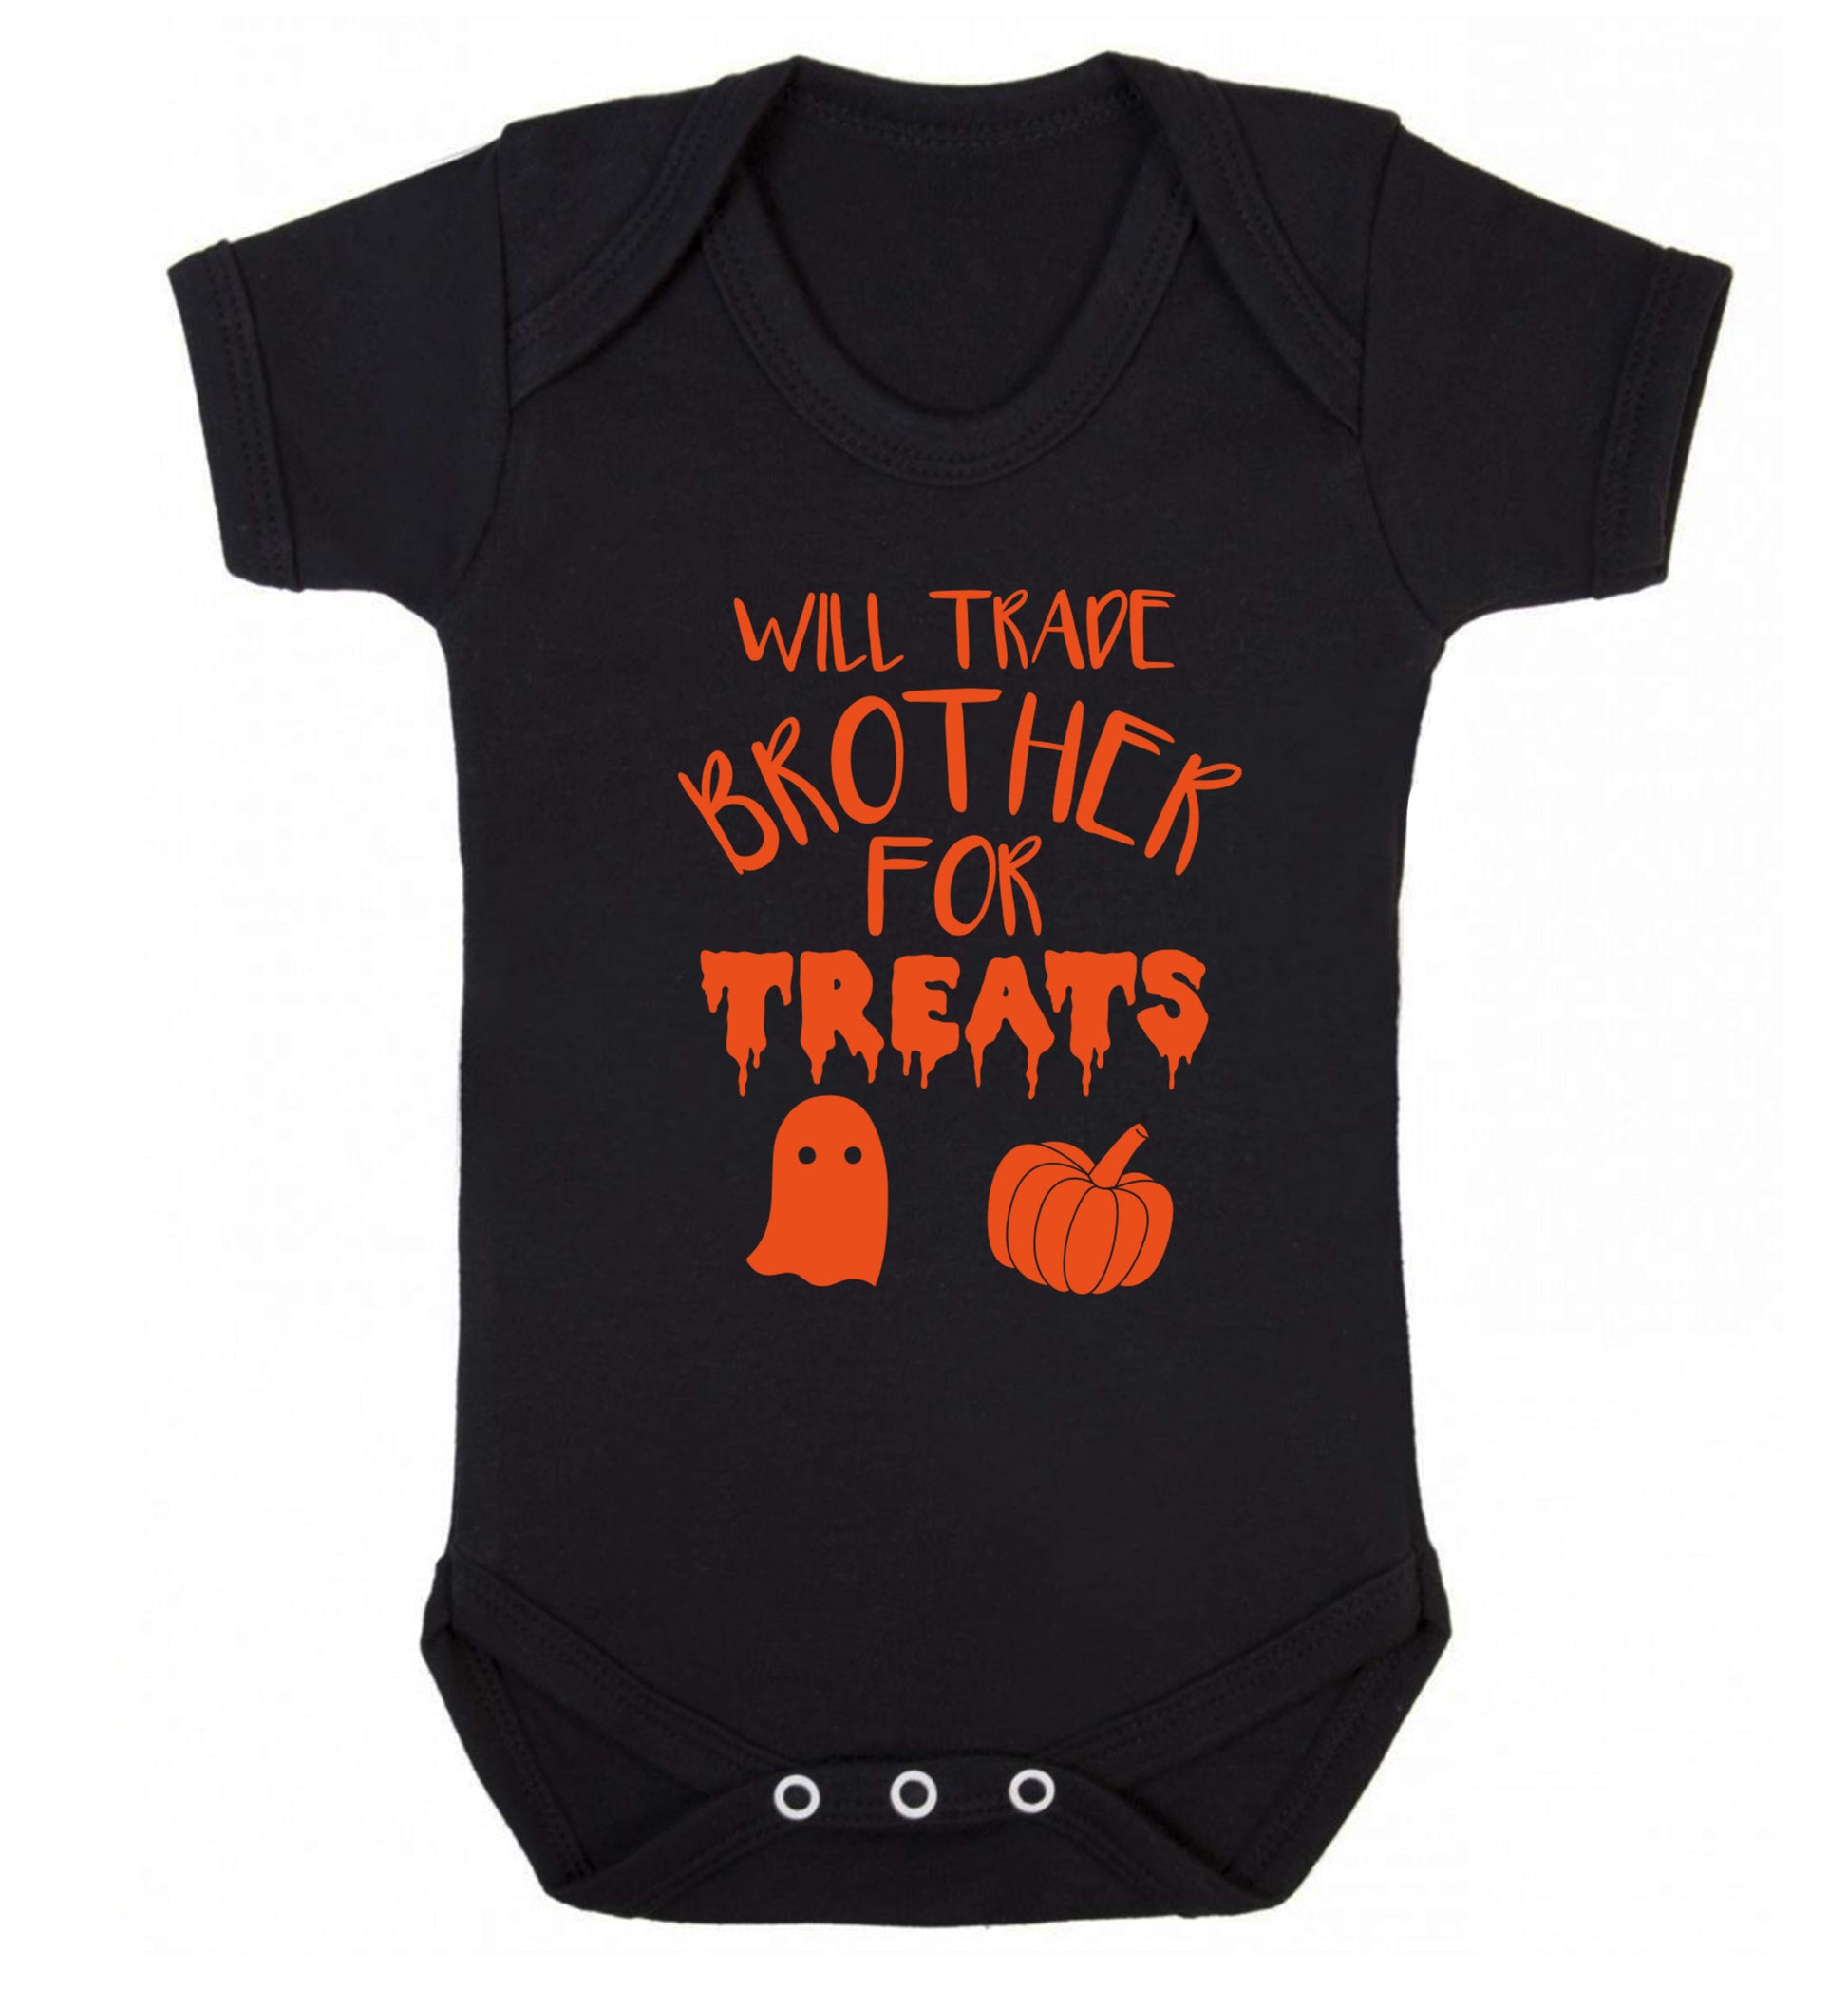 Will trade brother for treats Baby Vest black 18-24 months